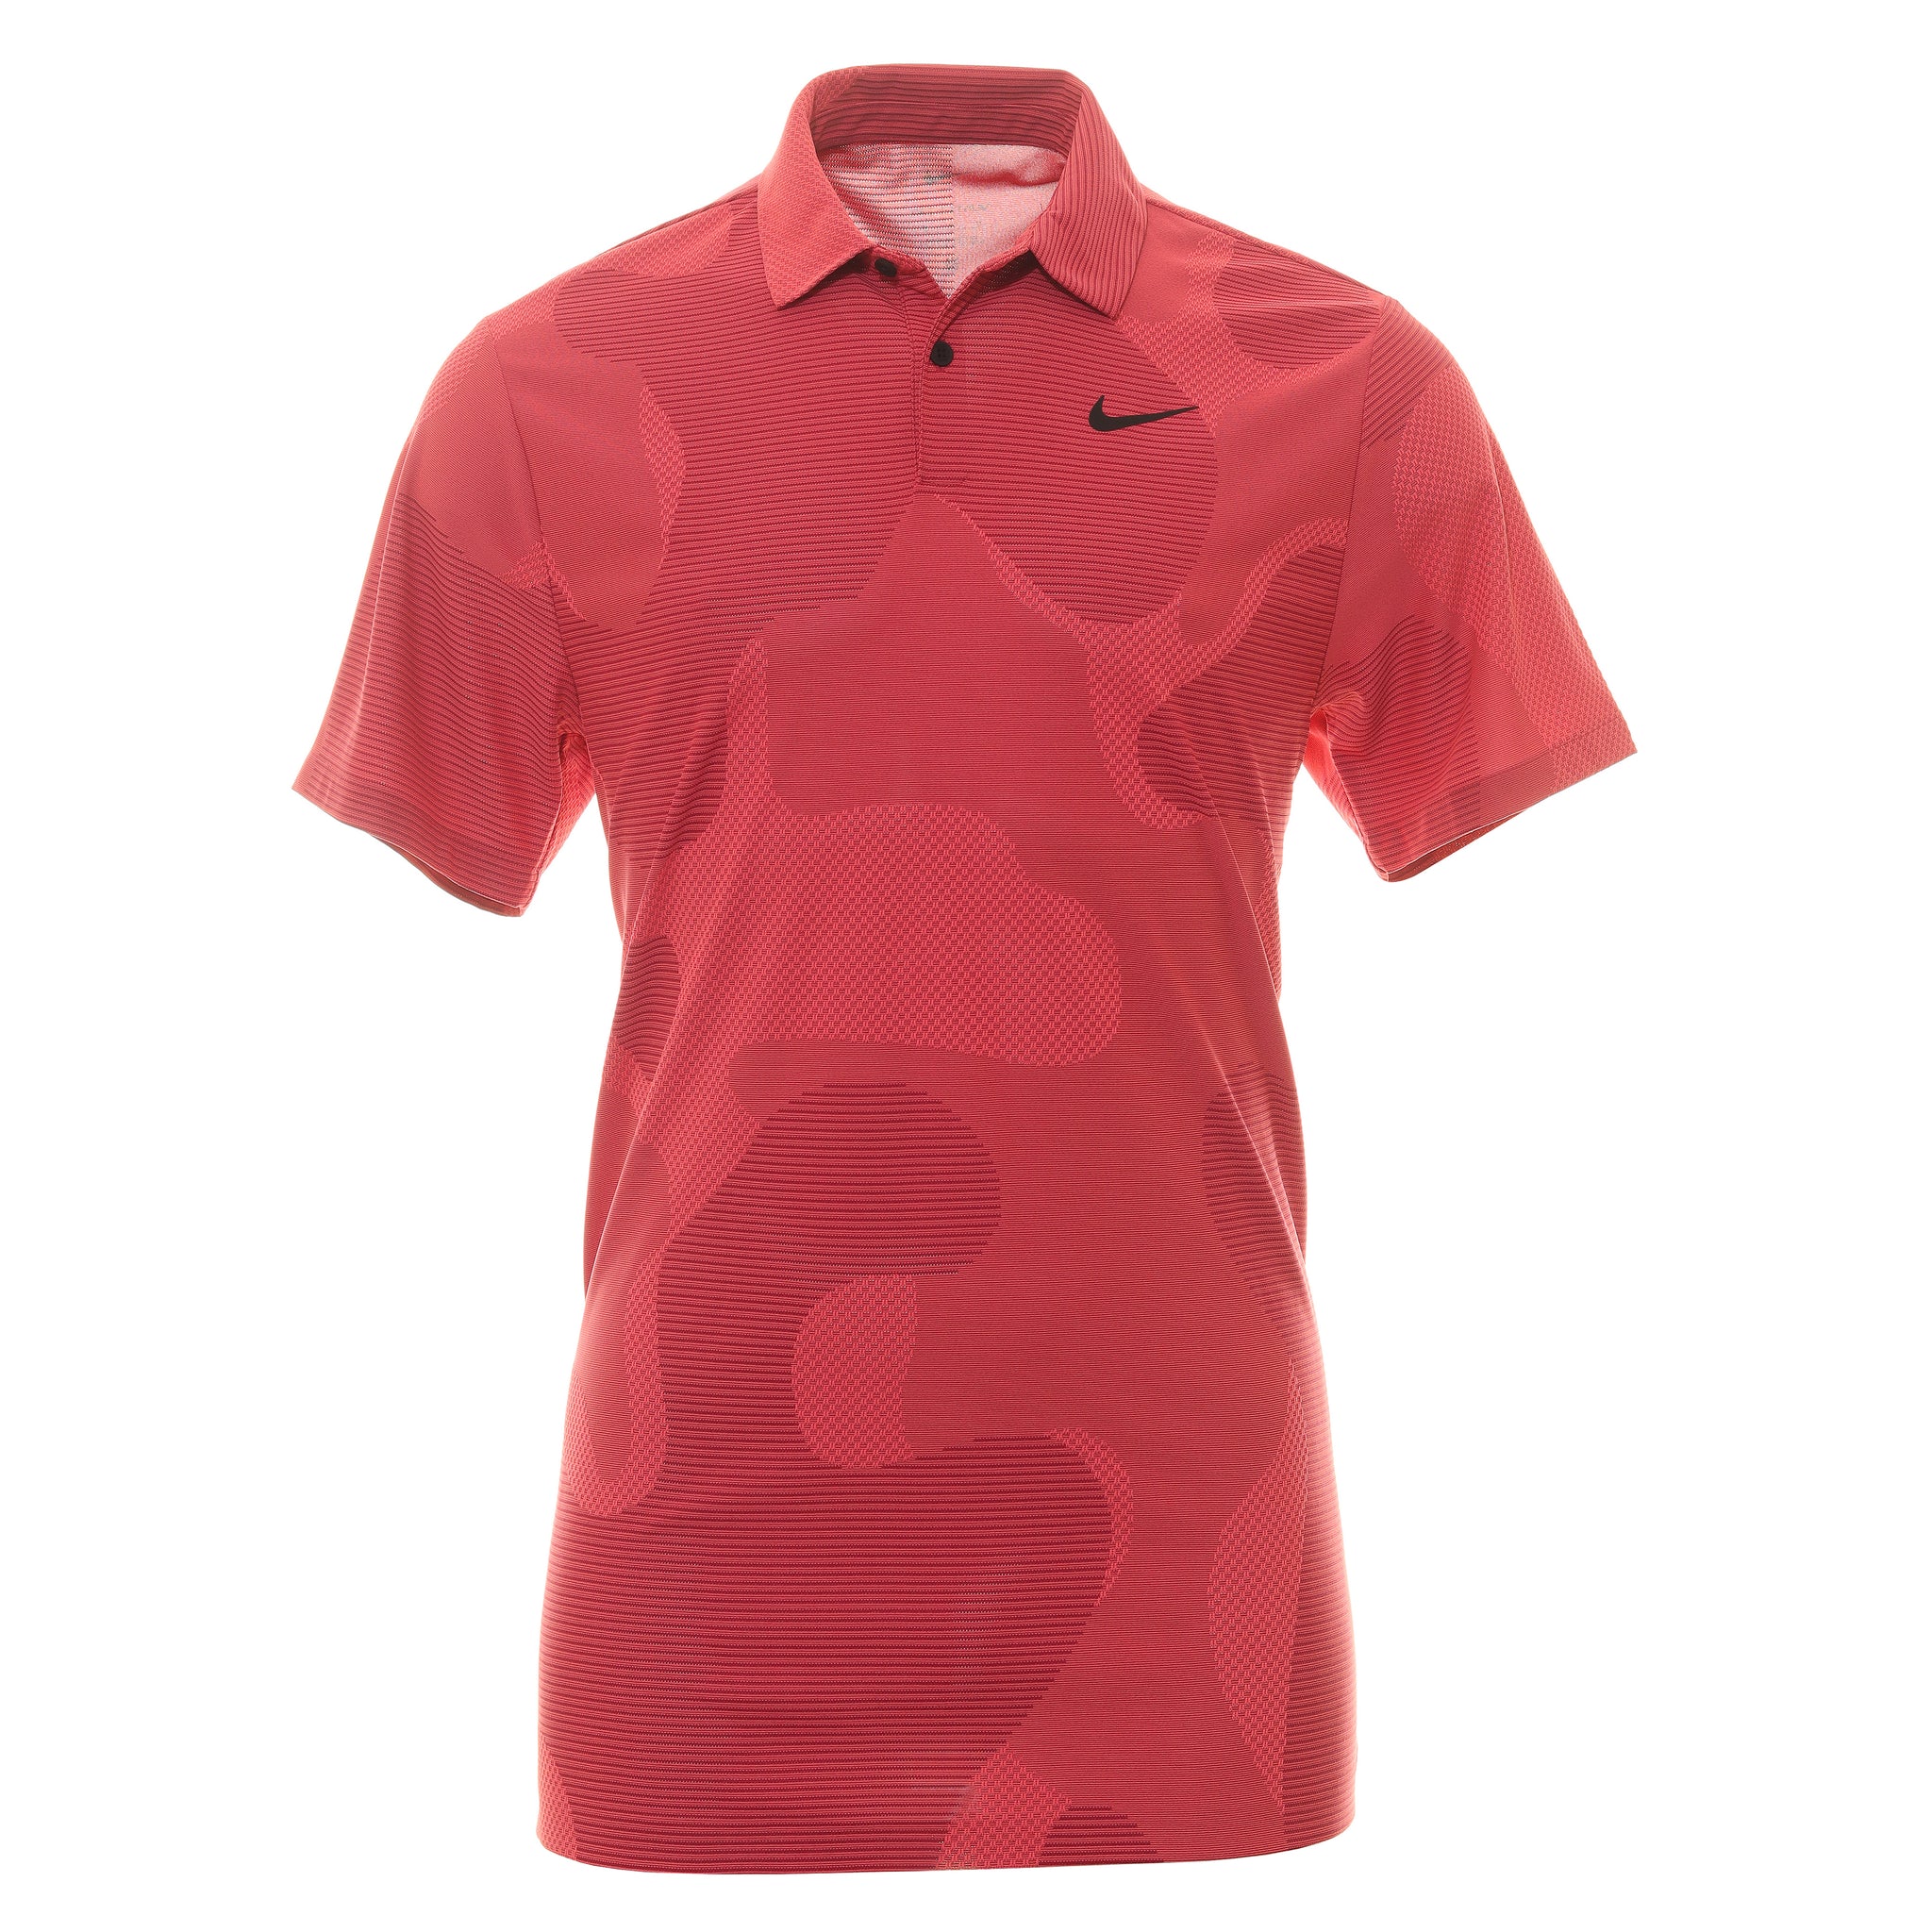 Nike Golf Dri-Fit ADV Tour Camo Shirt DR5312 Noble Red 620 | Function18